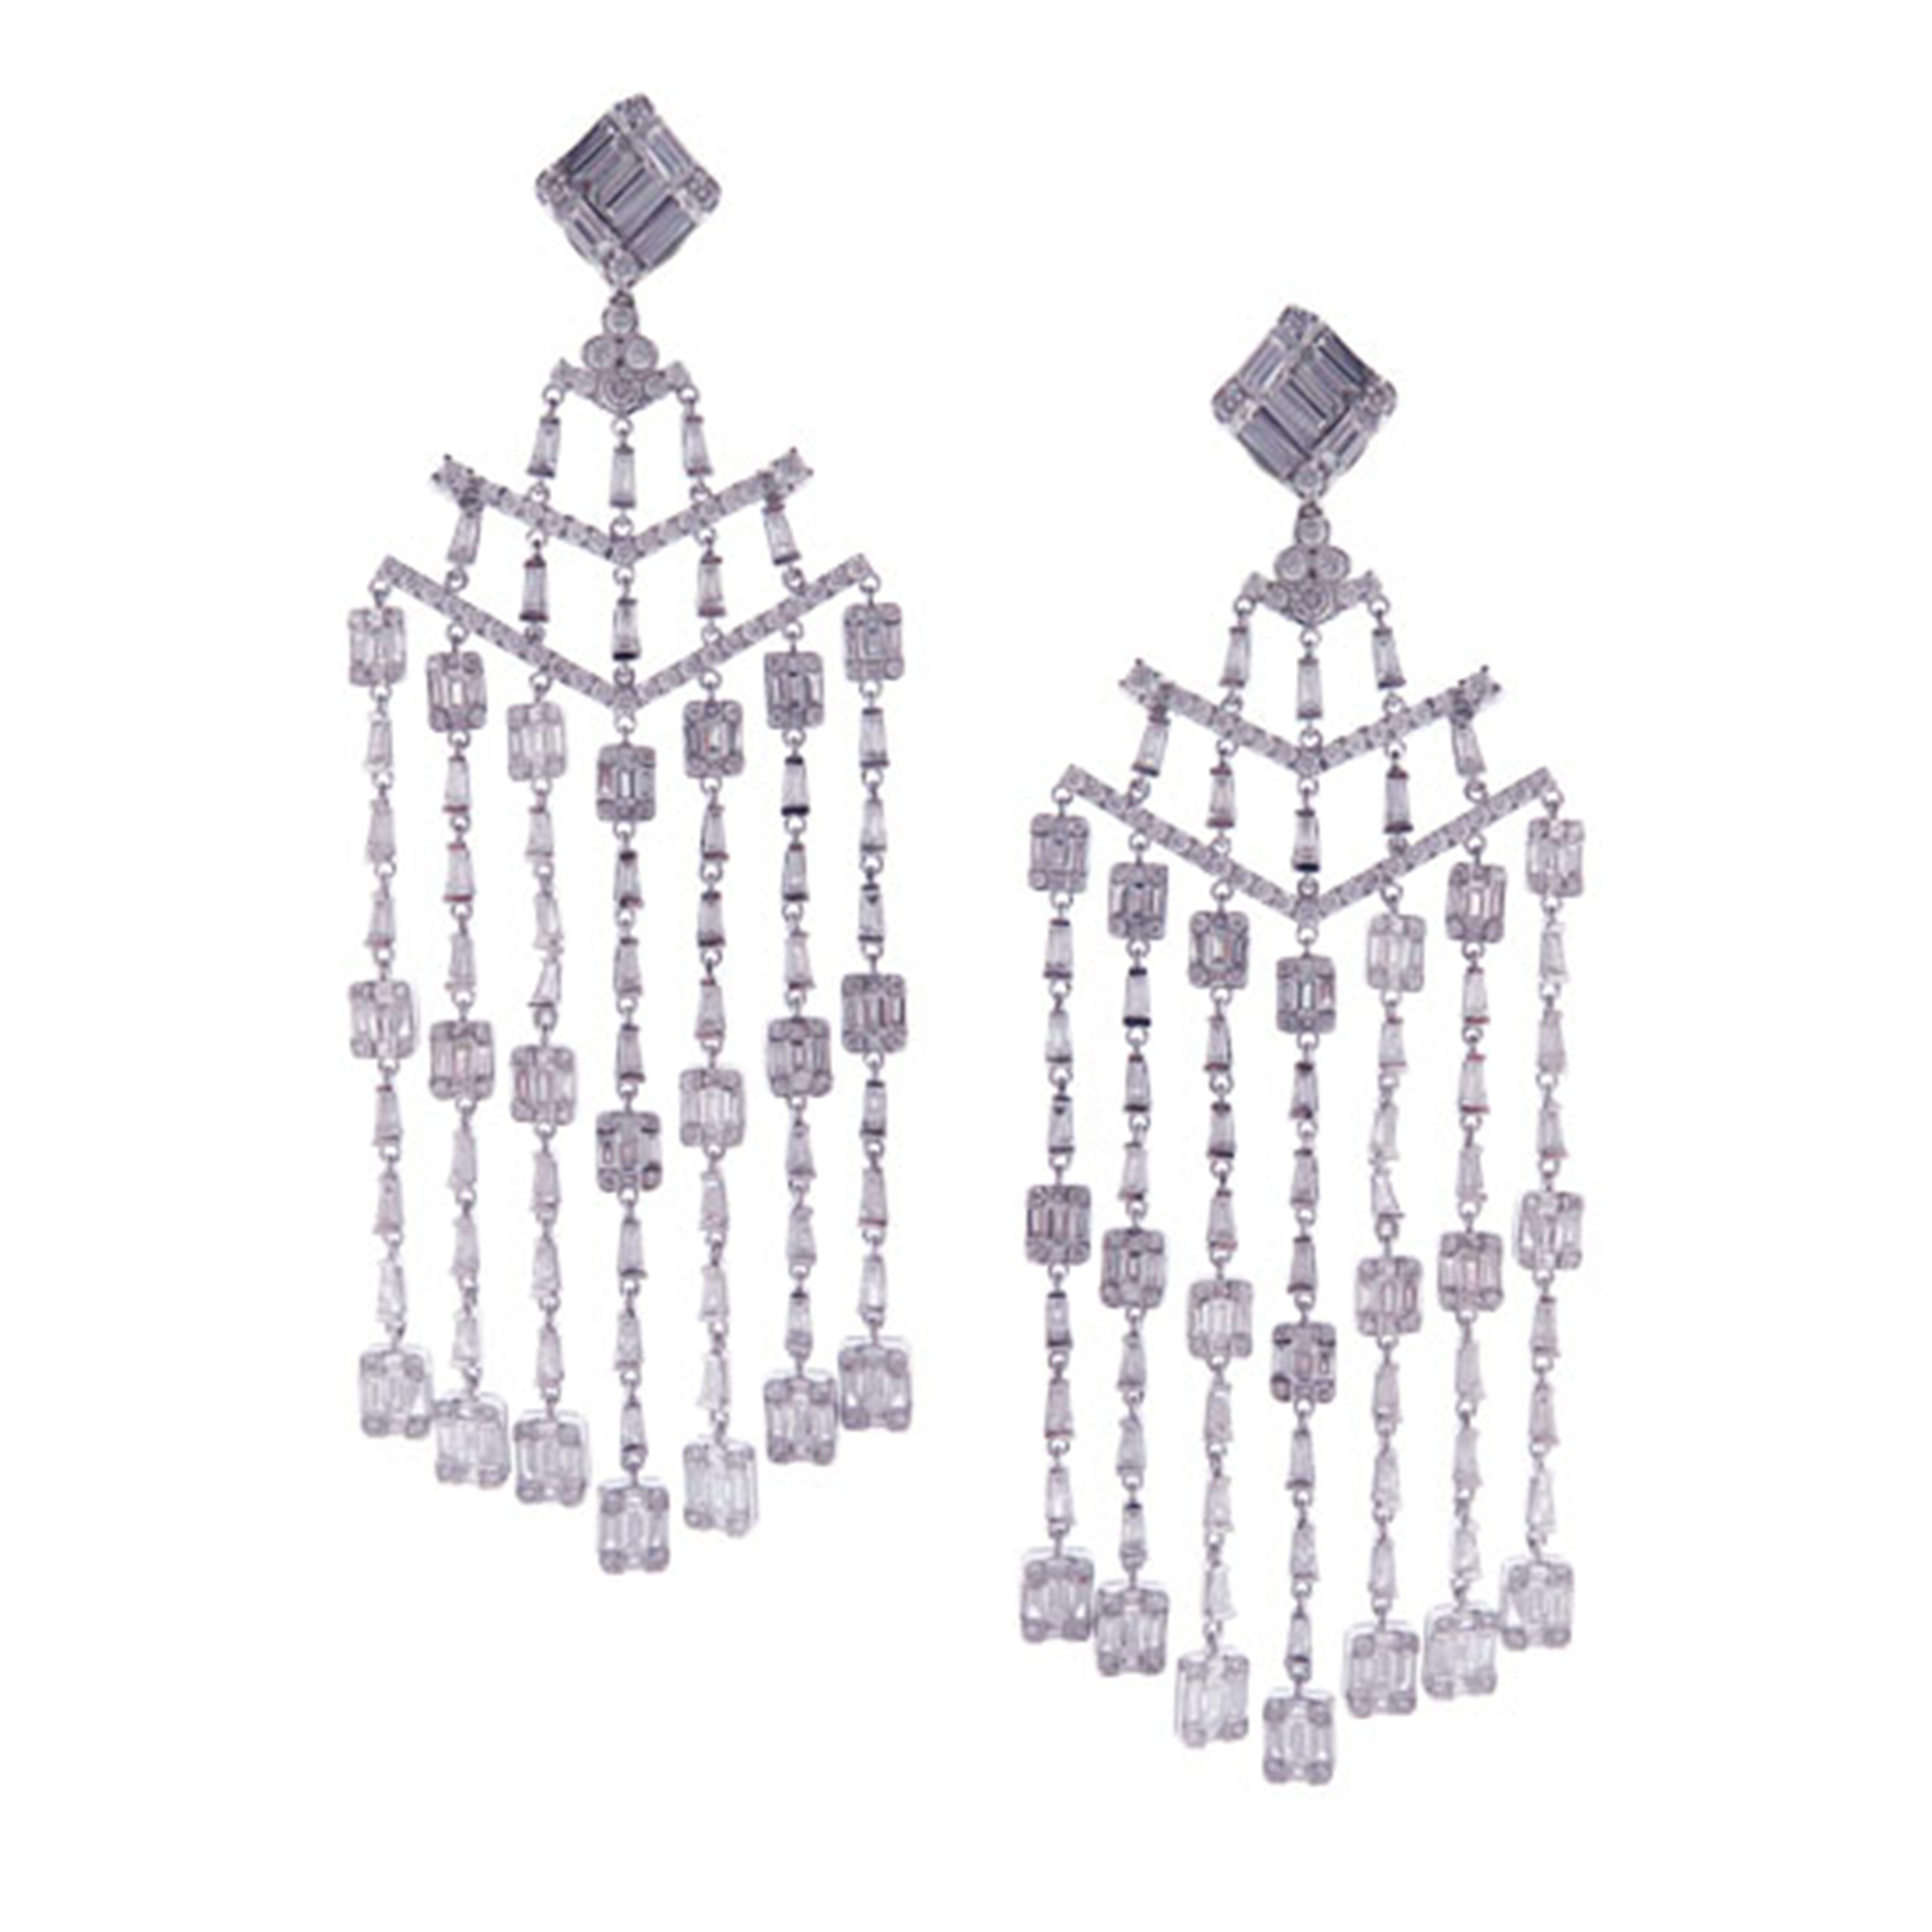 Earring Information
Metal Purity : 18K
Color : White Gold
Gold Weight : 27.24g
Length : 3.75''
Diamond Count : 268 Round Diamonds
Round Diamond Carat Weight : 2.31 ttcw
Baguette Diamonds Count : 327
Baguette Diamonds Carat Weight : 9.20 ttcw
Serial